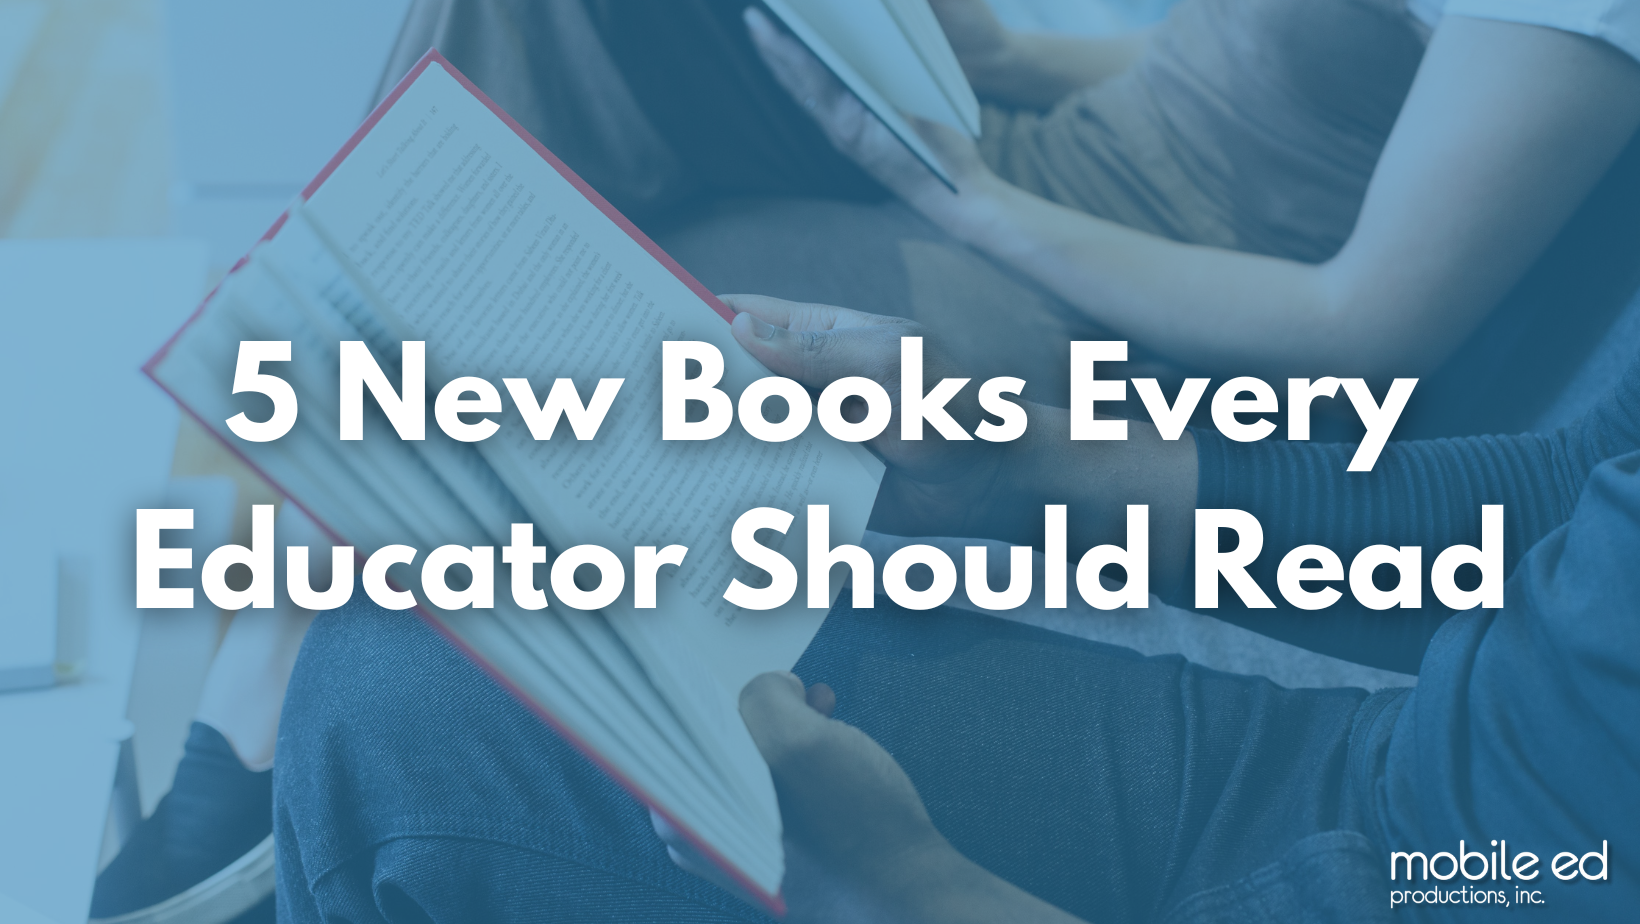 5 New Books Every Educator Should Read